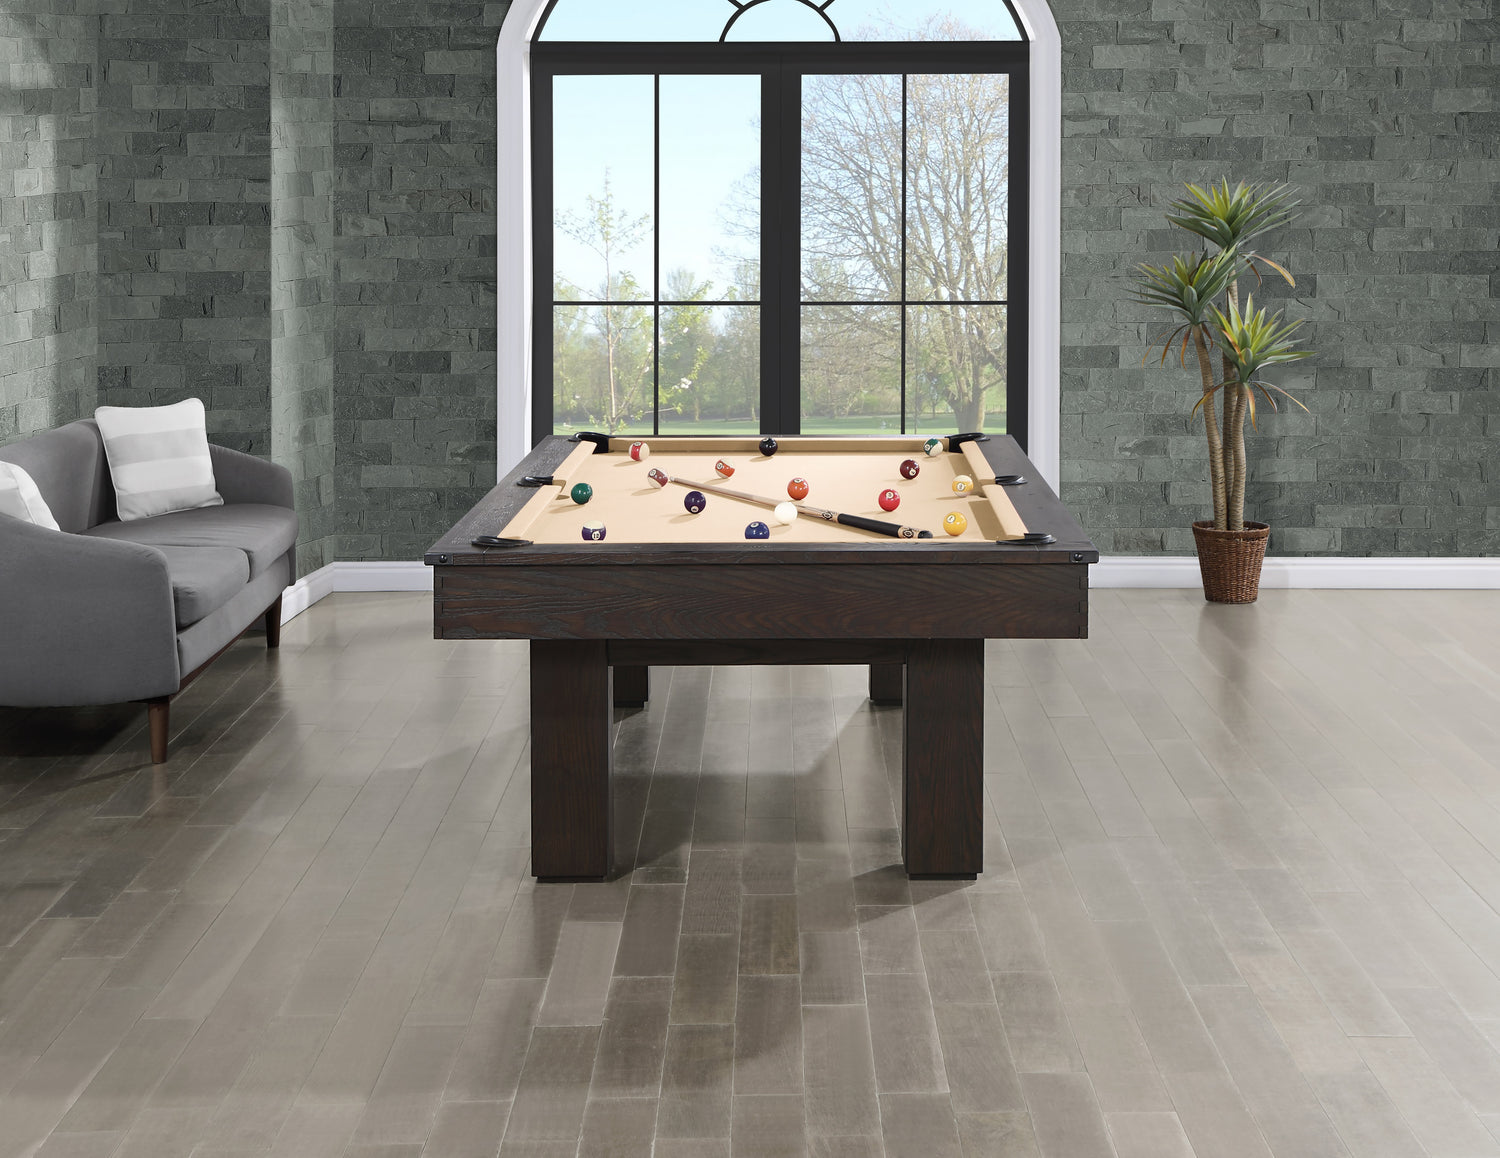 Legacy Billiards Colt II Pool Table in Whiskey Barrel Finish with Desert Cloth Rustic Room Scene - End View